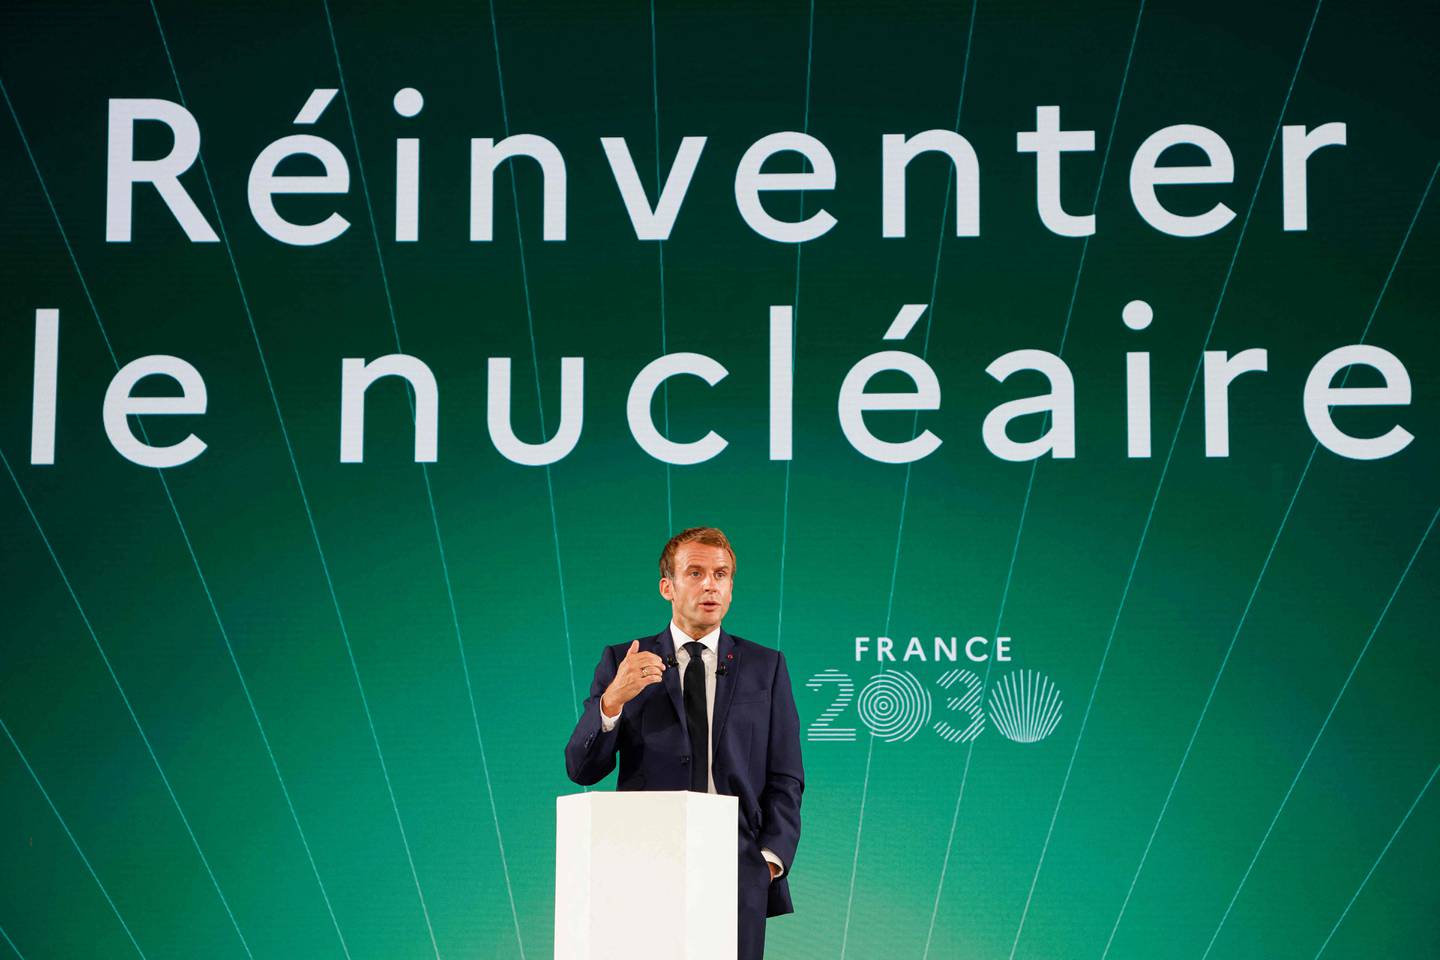 'Reinvent nuclear' was one of President Emmanuel Macron's slogans during a speech on his France 2030 agenda in Paris. AFP